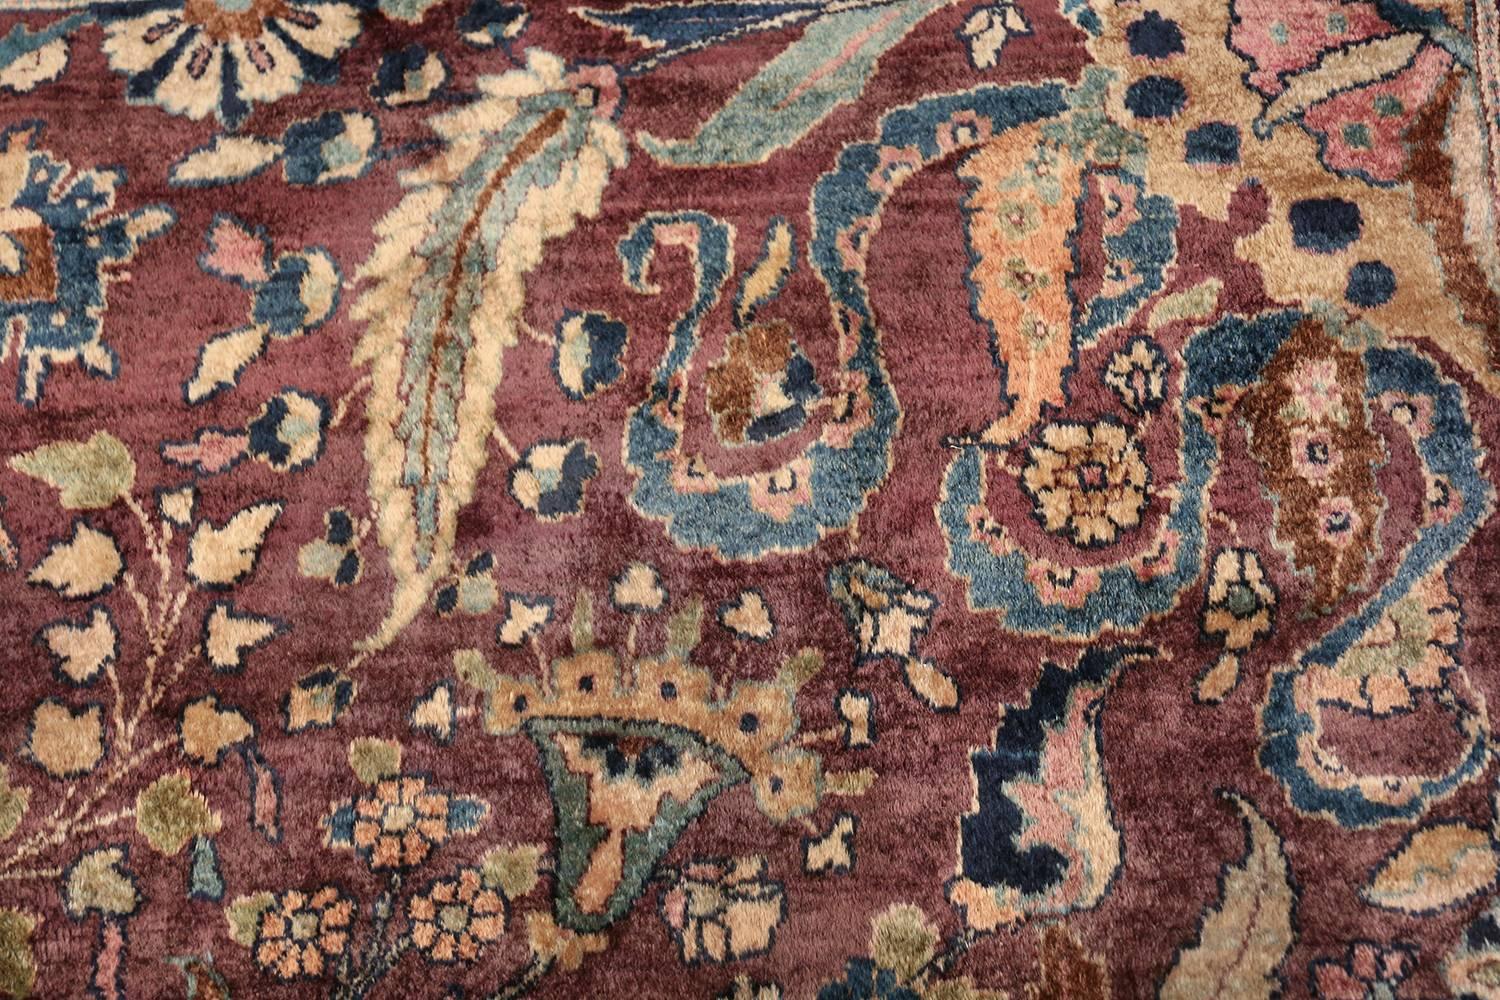 Hand-Knotted Antique Persian Khorassan Rug. Size: 10' x 14' 7